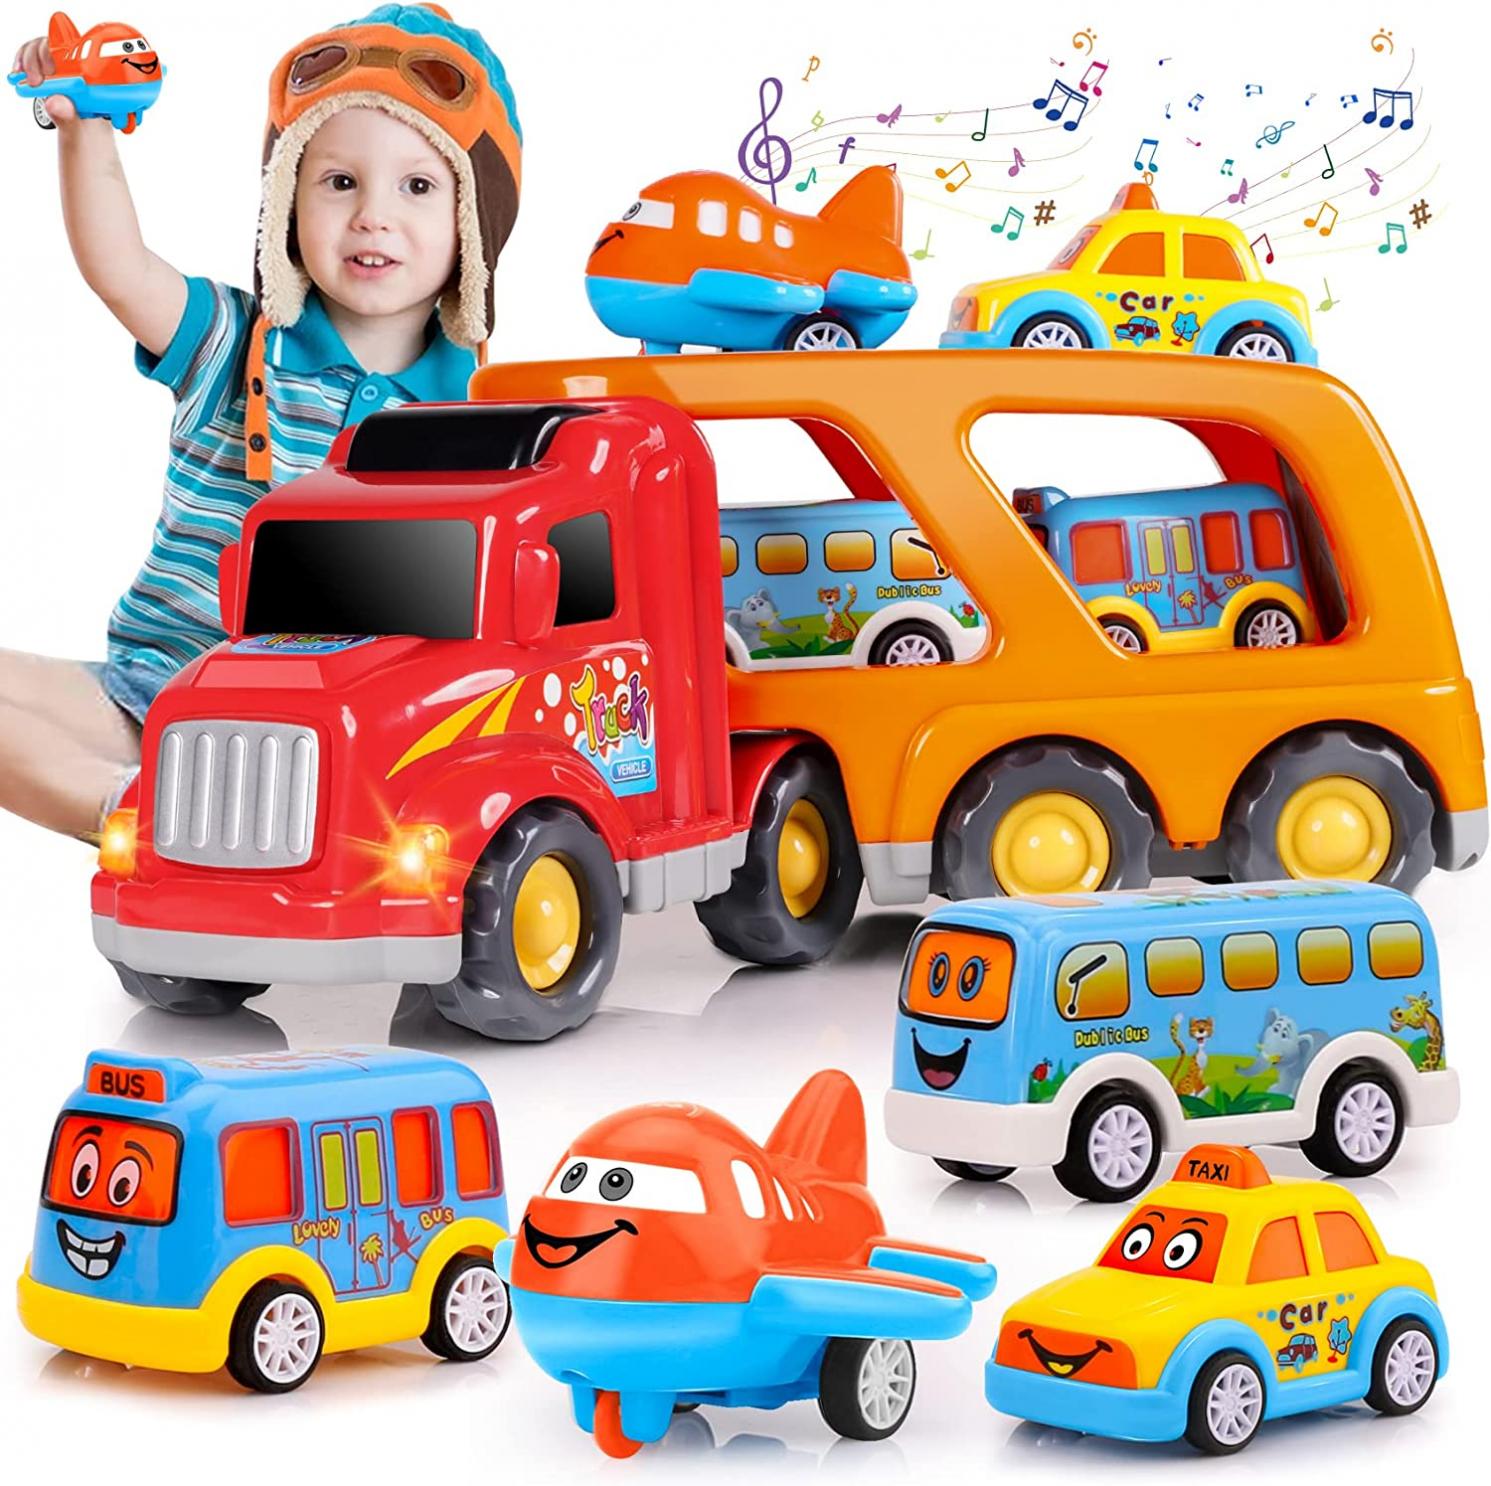 Nicmore Toddler Toys Car for Boys: Kids Toys for 1 2 3 4 Year Old Boys | Boy Toys 5 in 1 Carrier Toy Trucks | Toddler Toys Age 2-4 Baby Toys 36-48 Months Birthday Kids Gift Toddler Toys Age 1-5